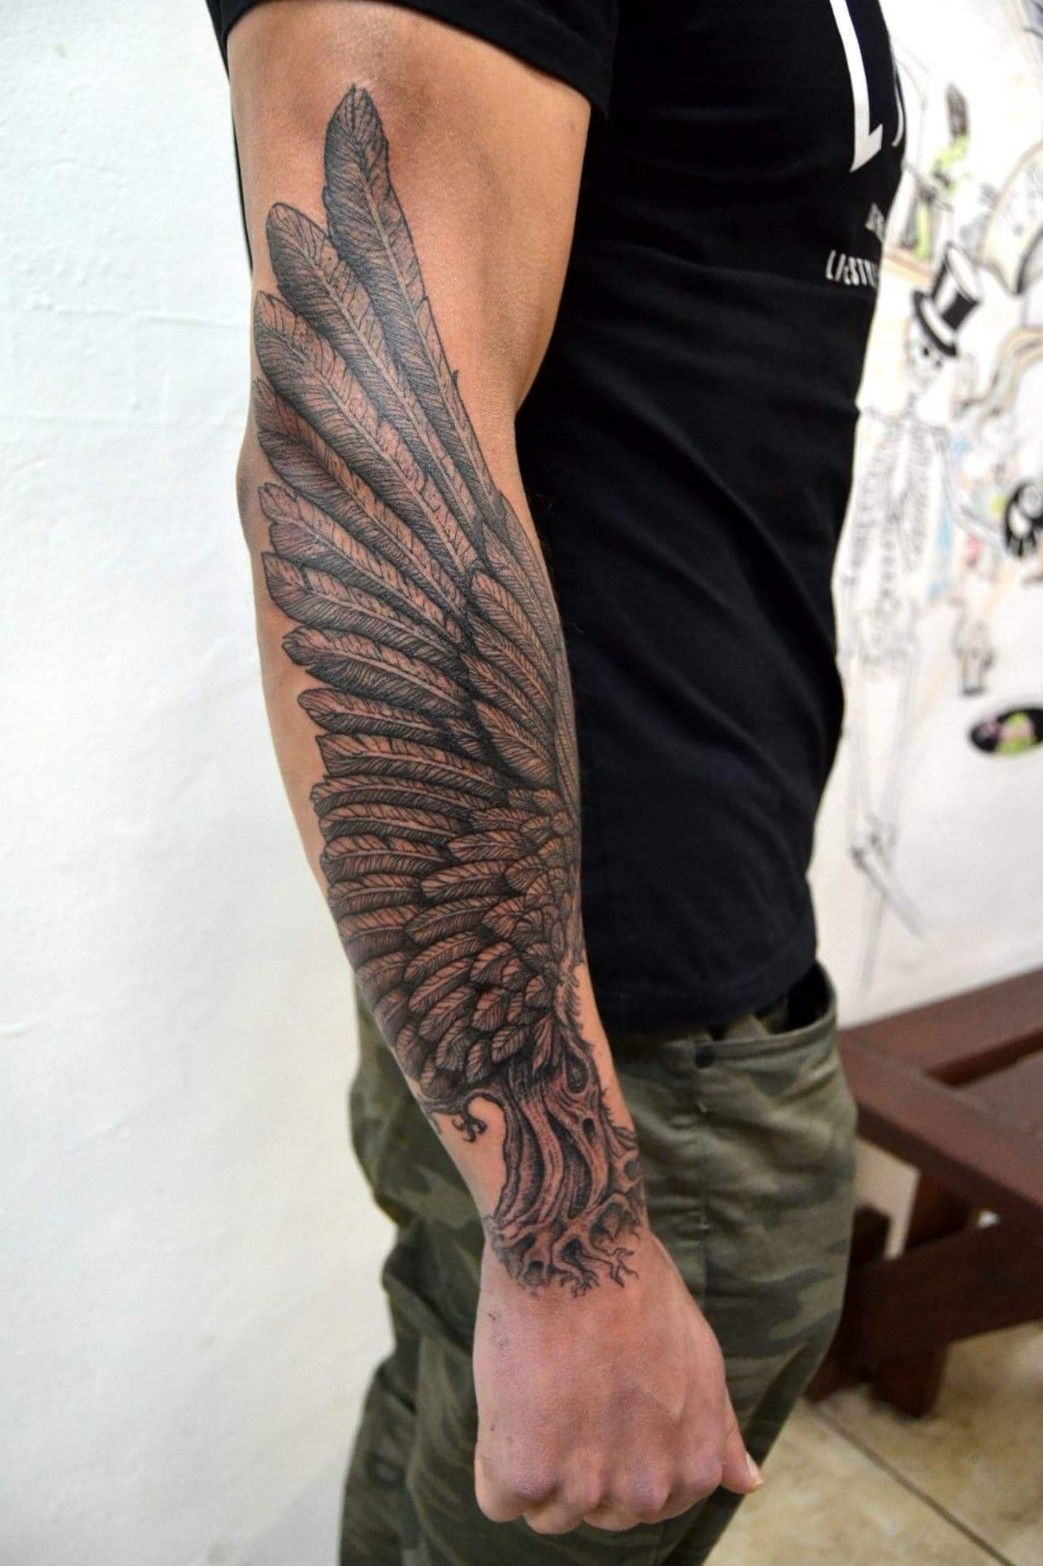 Crow wings tattooed on the top of shoulder